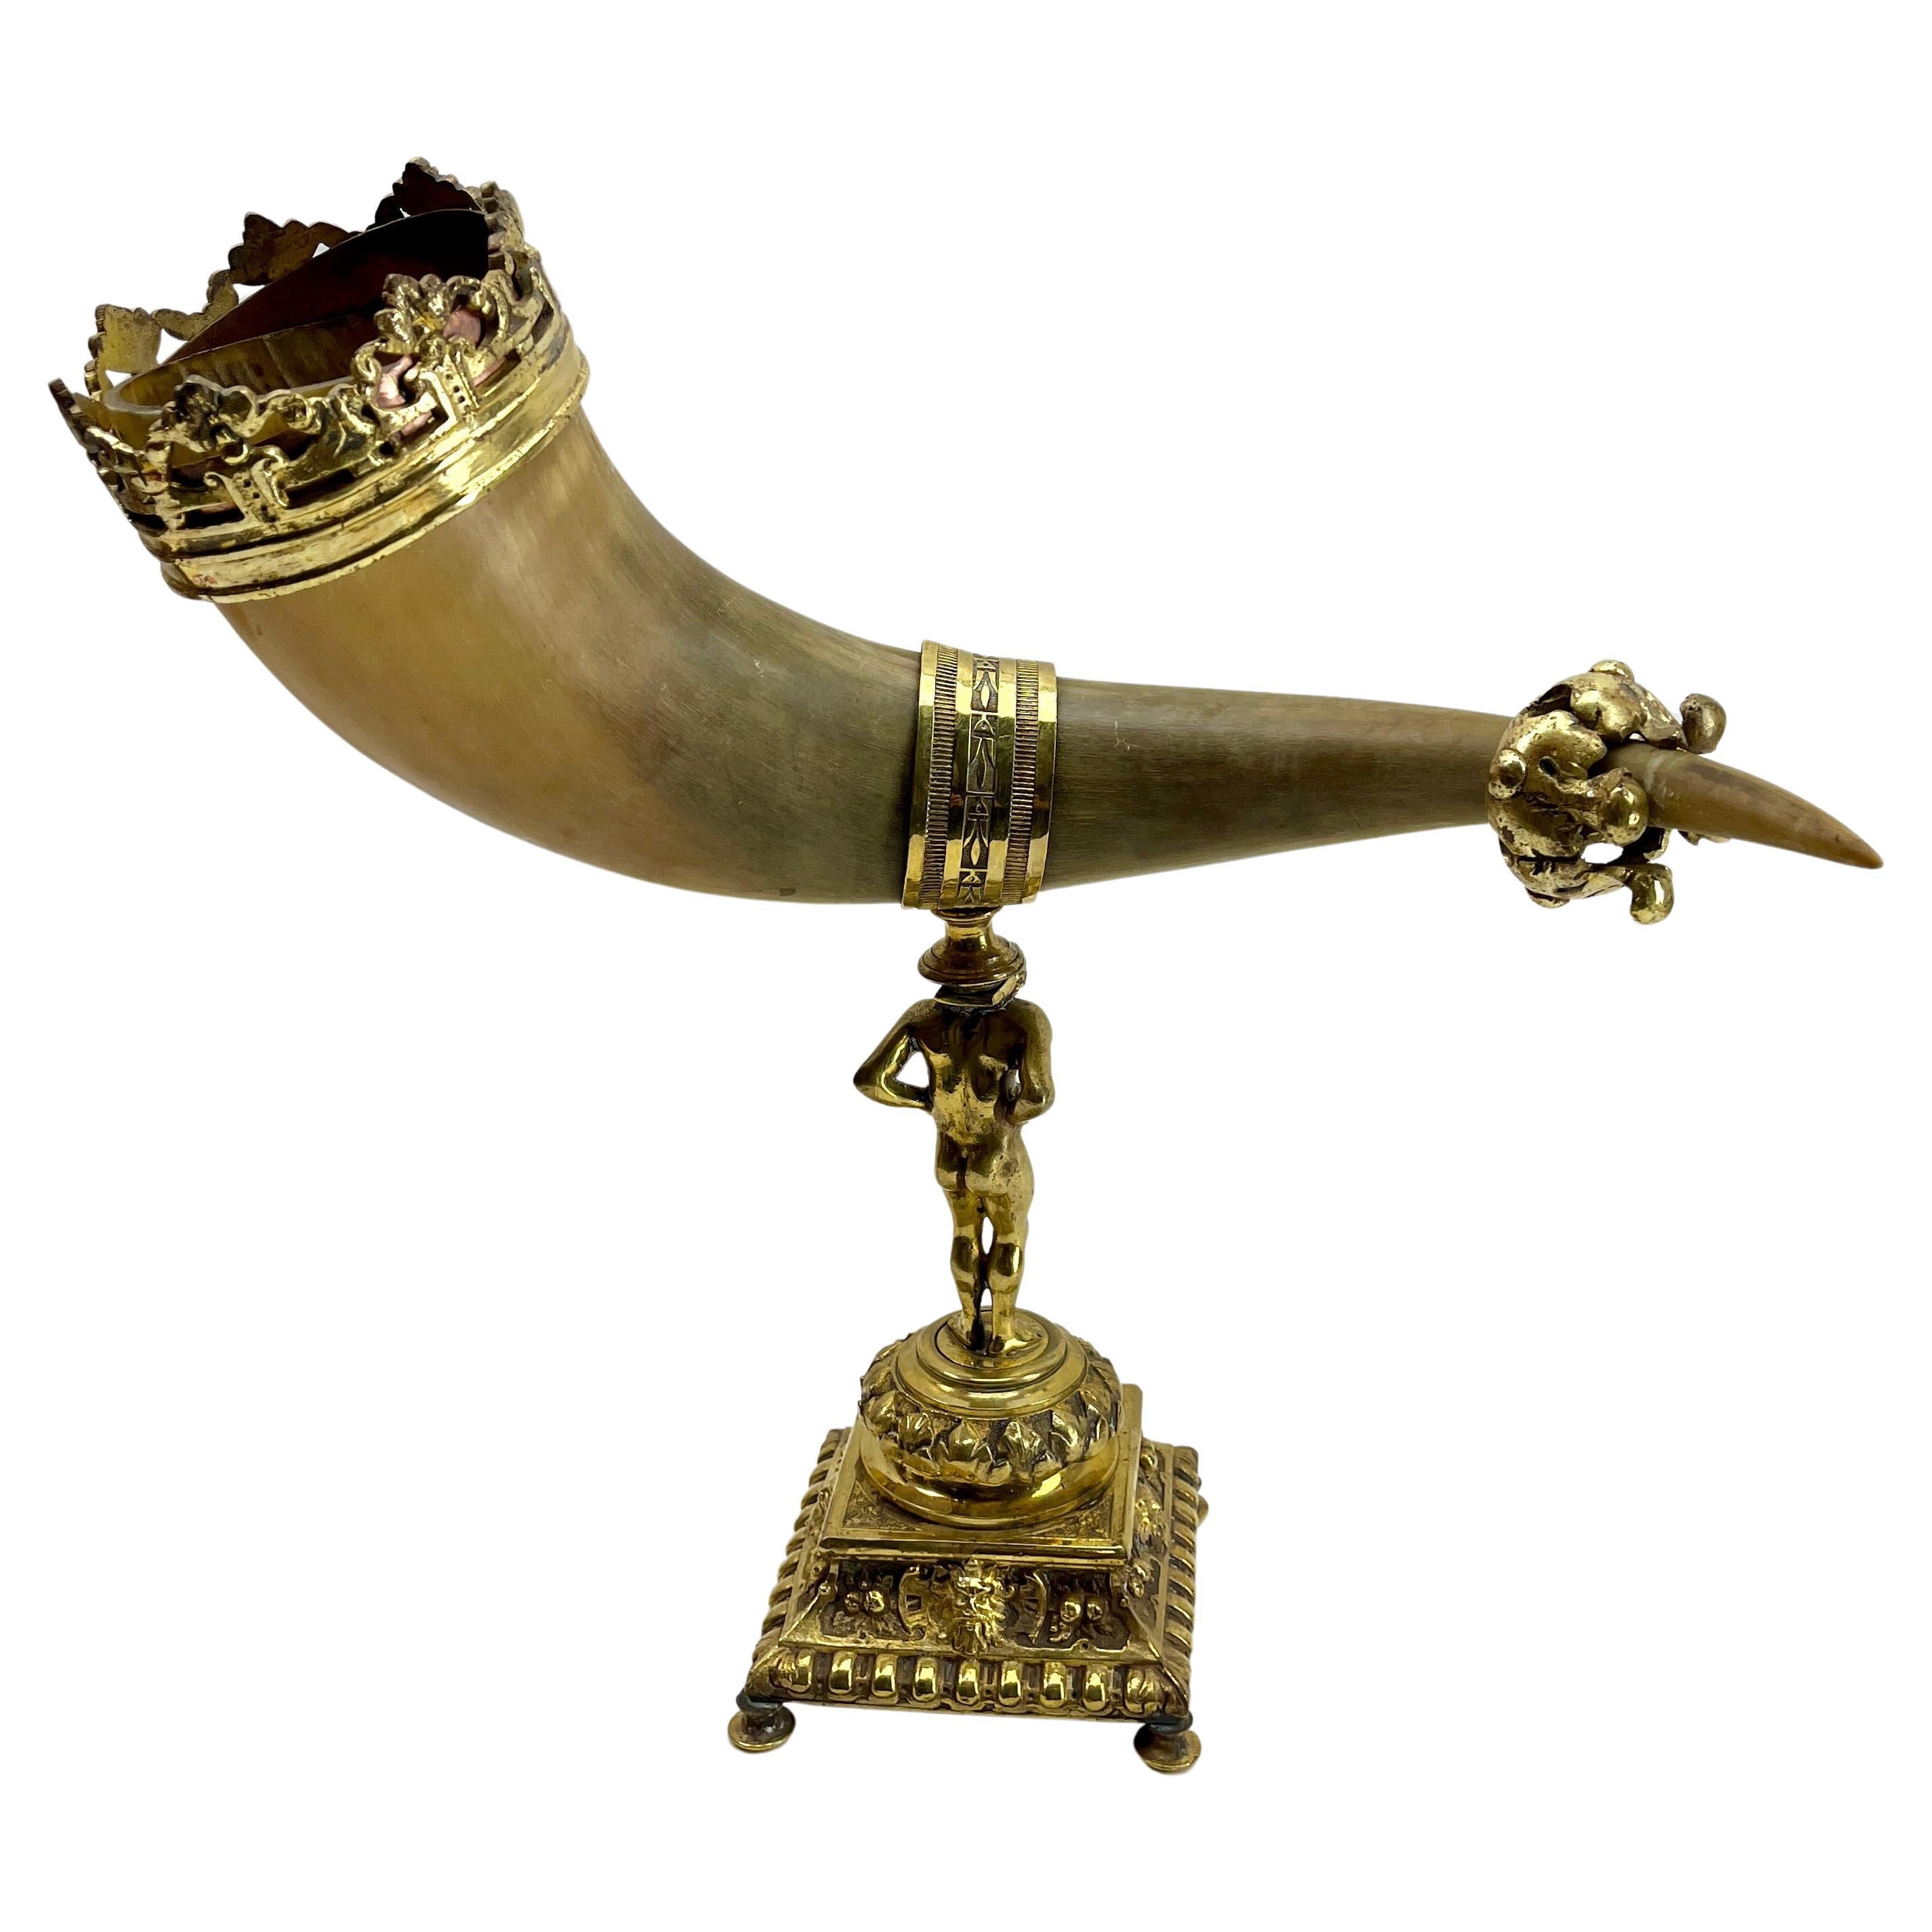 Horn and Gilt Bronze Ornaments on Stand Mounted Cornucopia.

Mounted, and  richly embellished with crown, collar
Supported on a cast stand on a square base.

Please don't hesitate to get in touch with any further questions.  

With Best Wishes